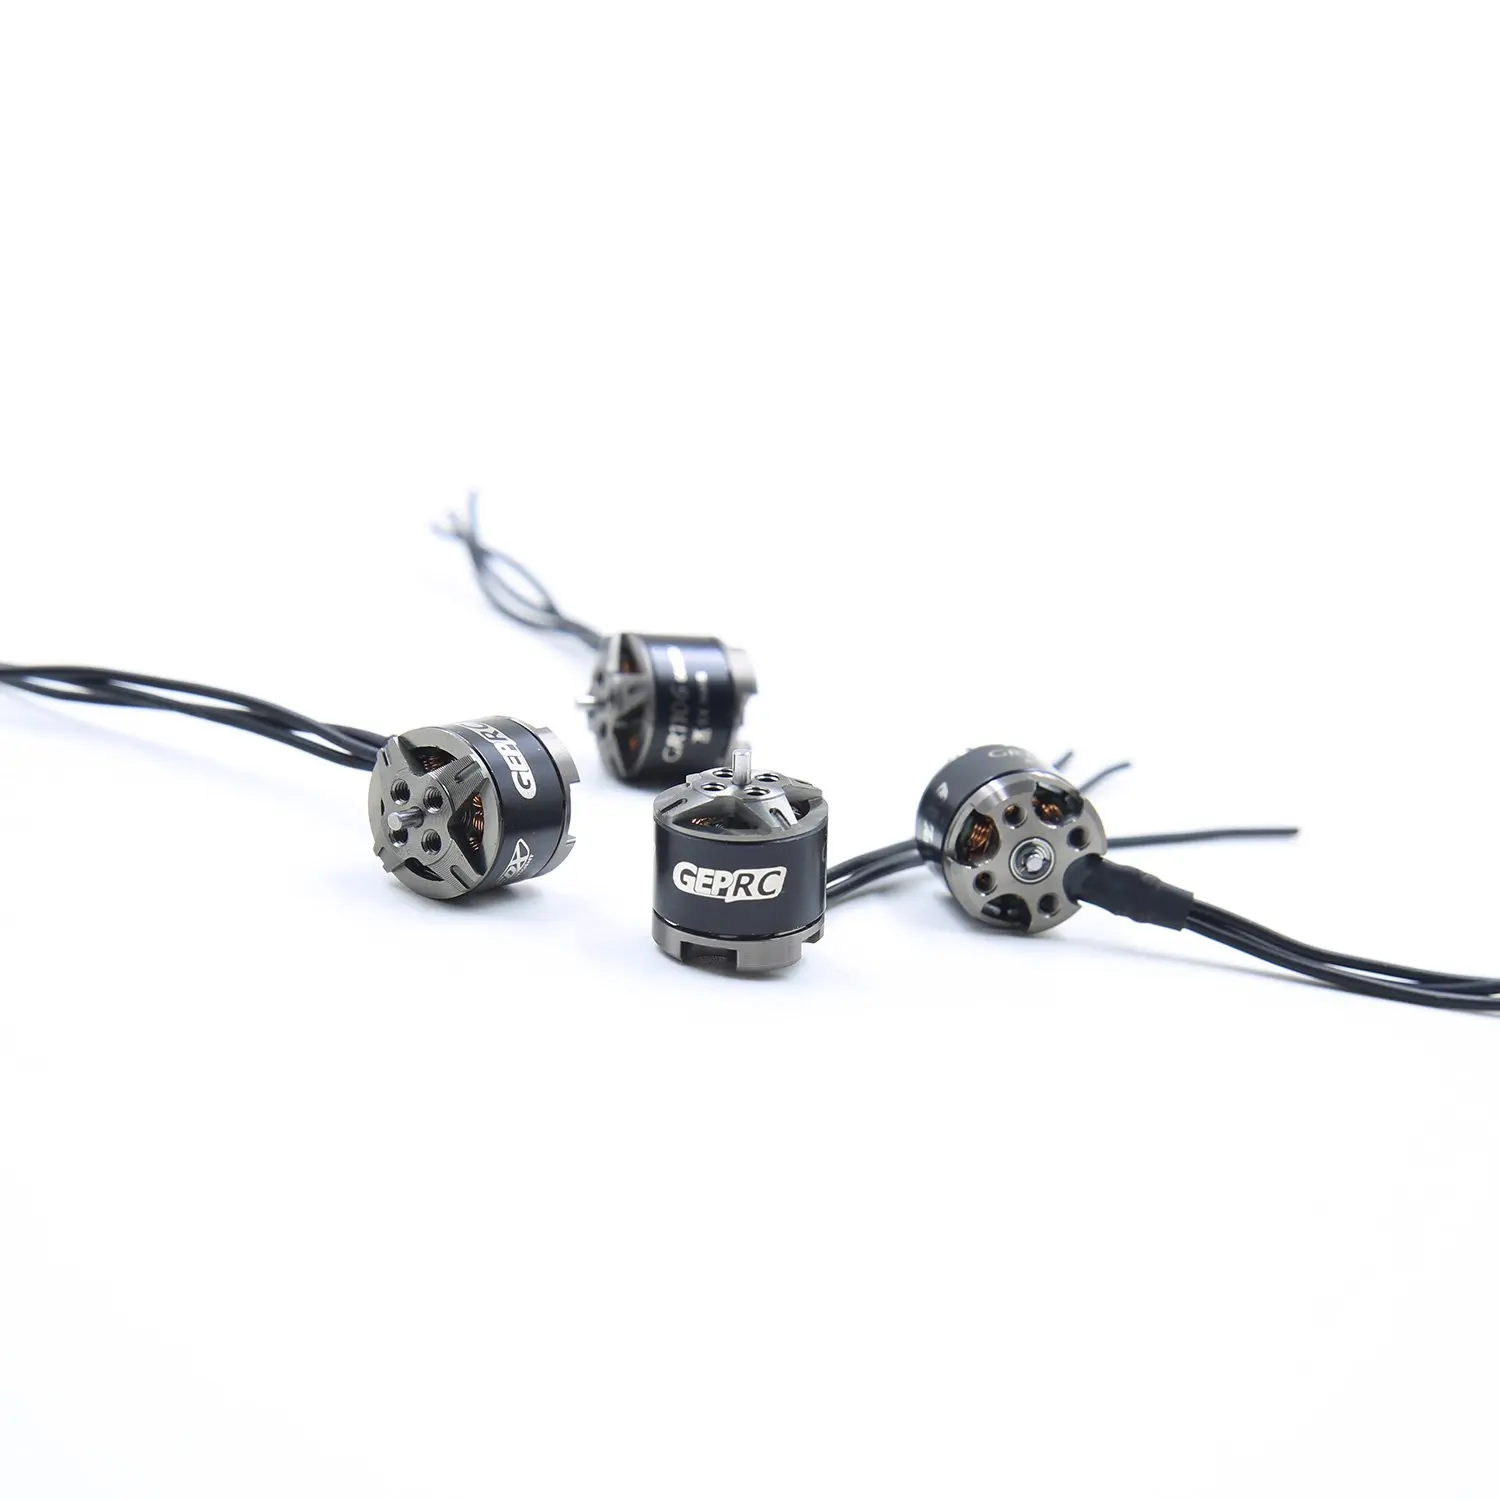 4PCS GEPRC GR1106 7500KV 6000KV 5000KV 4500KV 2-4S Brushless Motor for RC FPV Racing Freestyle Tinywhoop Cinewhoop Ducted Drones